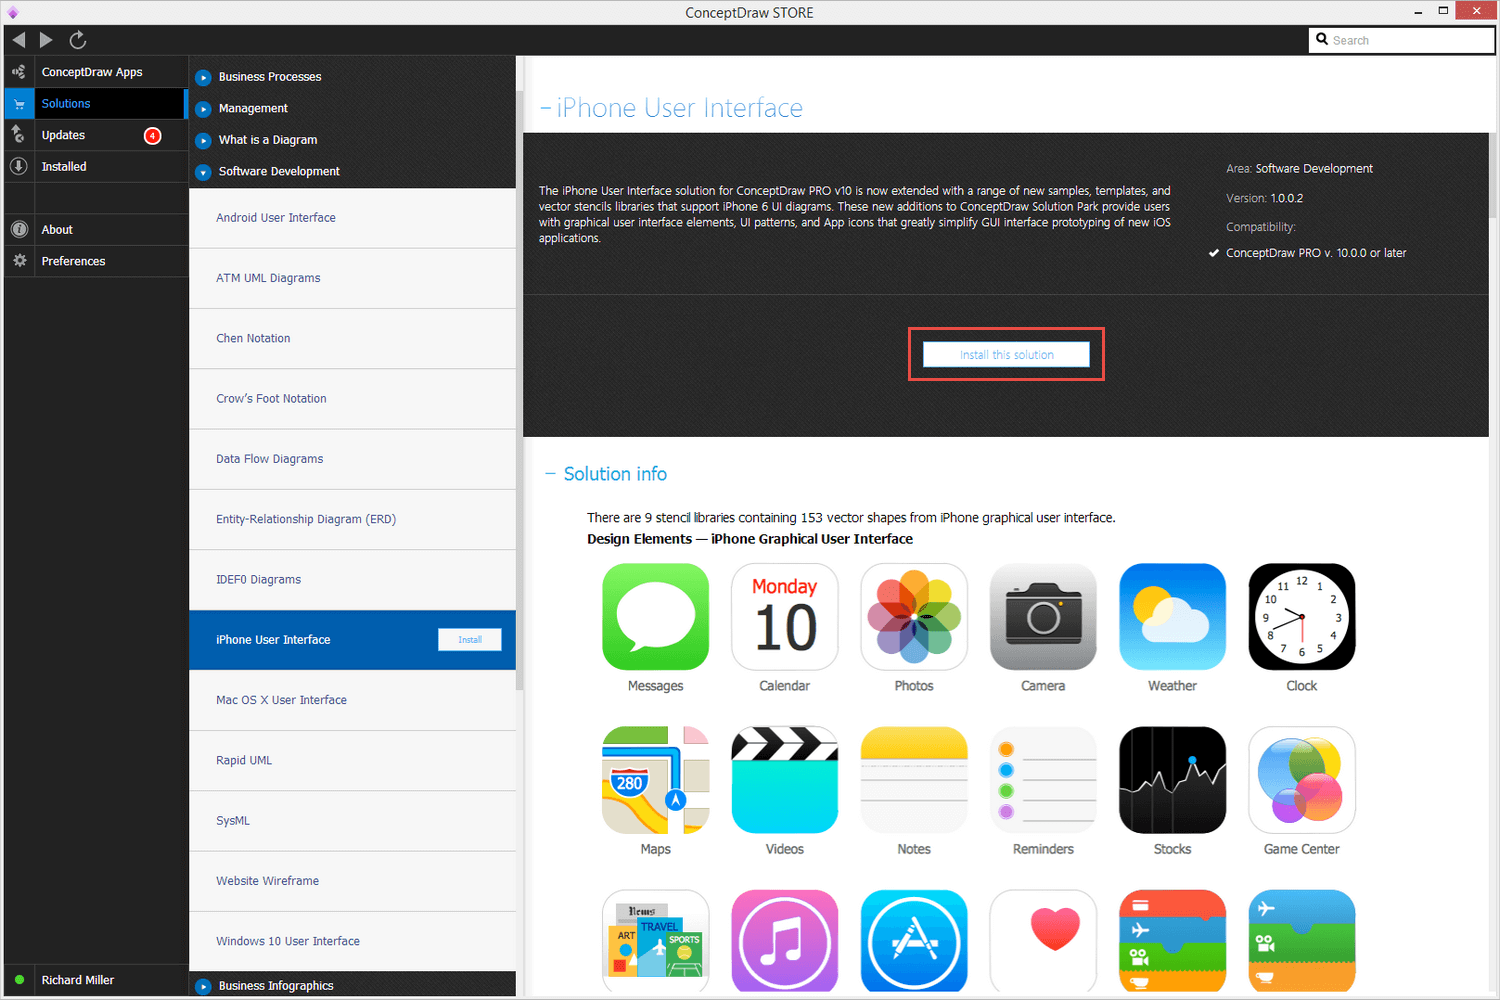 iPhone User Interface Solution - Install